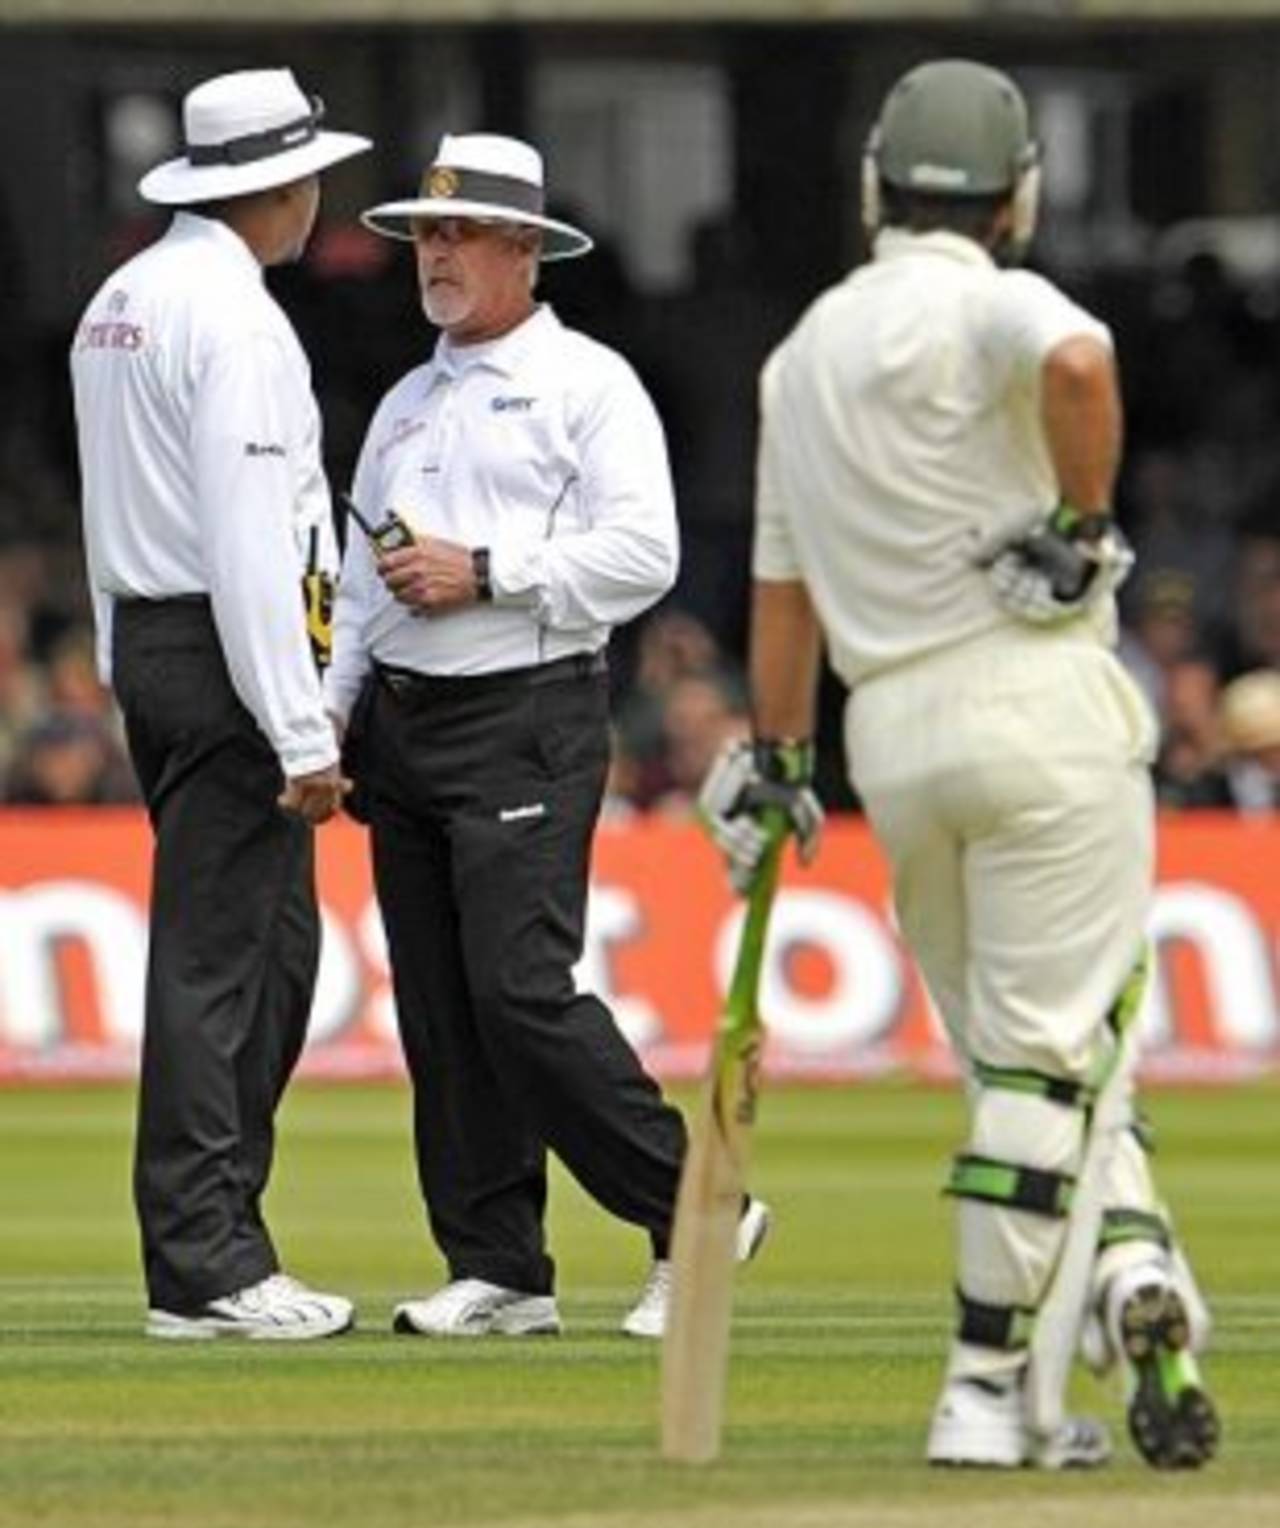 The umpires confer before the Ricky Ponting dismissal, England v Australia, 2nd Test, Lord's, 2nd day, July 17, 2009